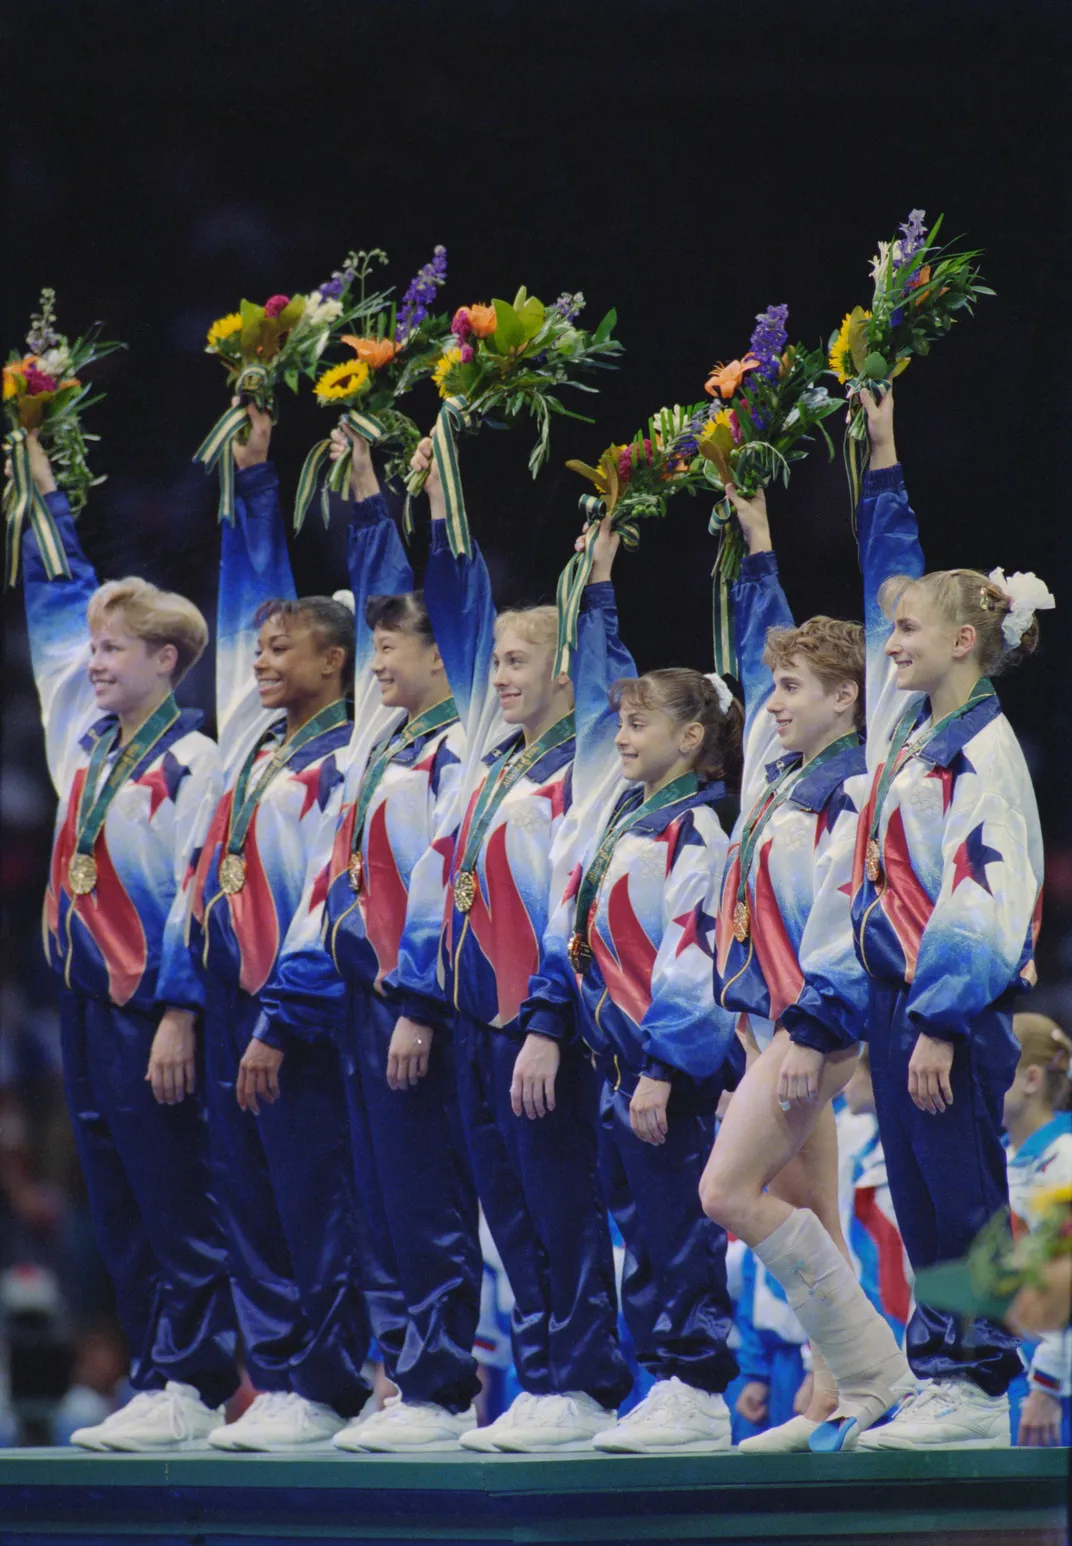 The Magnificent Seven 1996 team, from left to right: Amanda Borden, Dominique Dawes, Amy Chow, Jaycie Phelps, Dominique Moceanu, Kerri Strug and Shannon Miller